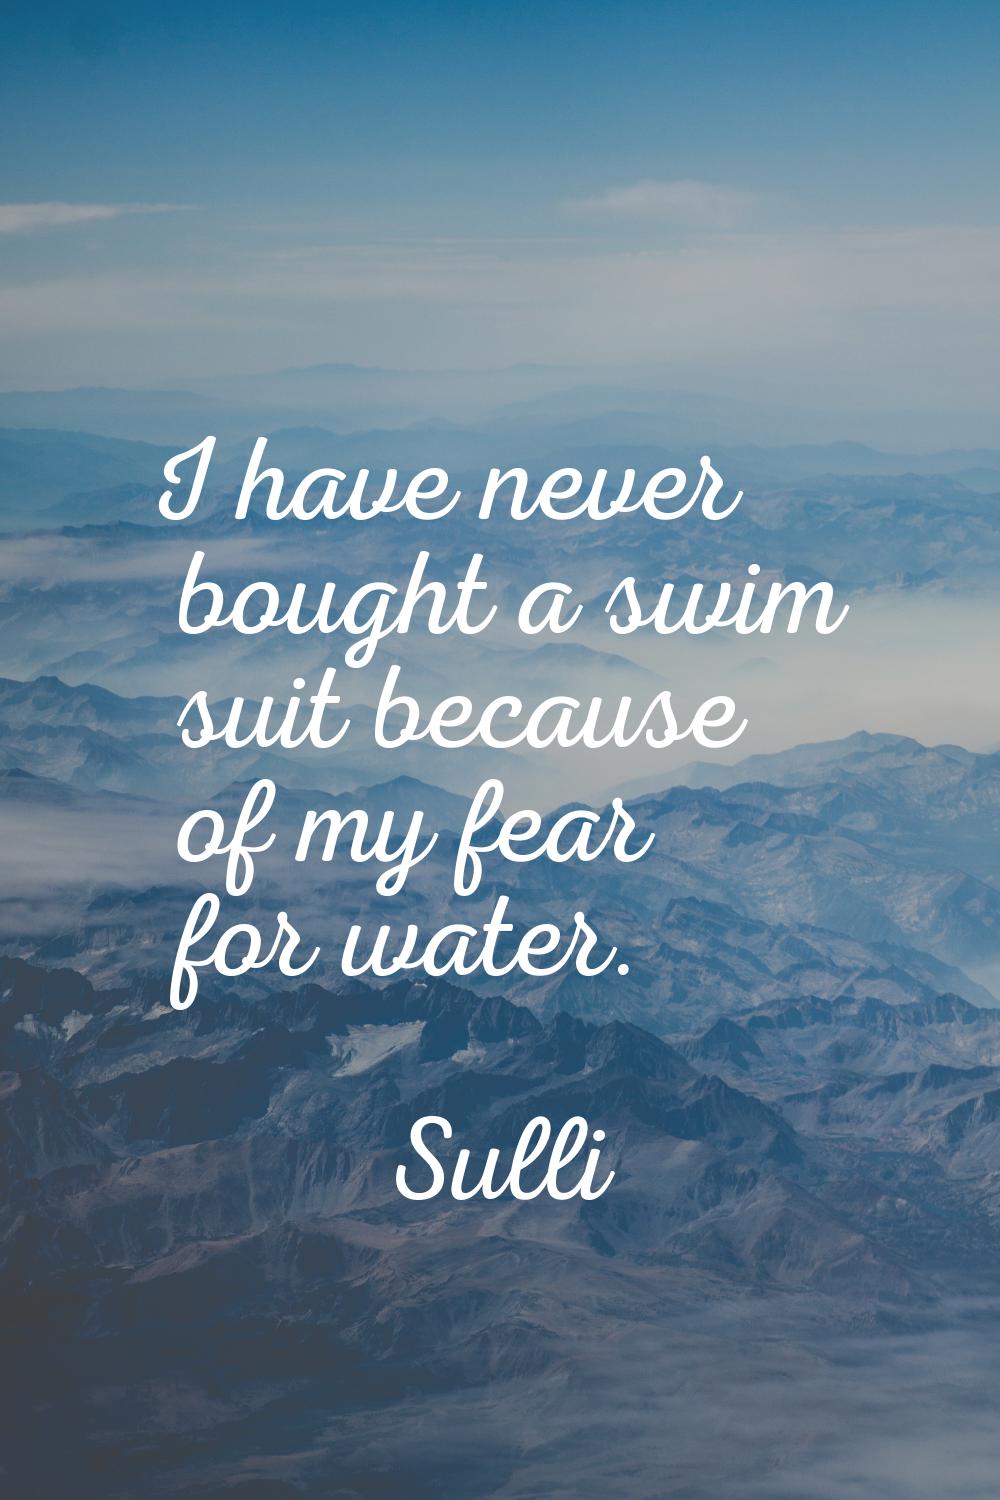 I have never bought a swim suit because of my fear for water.